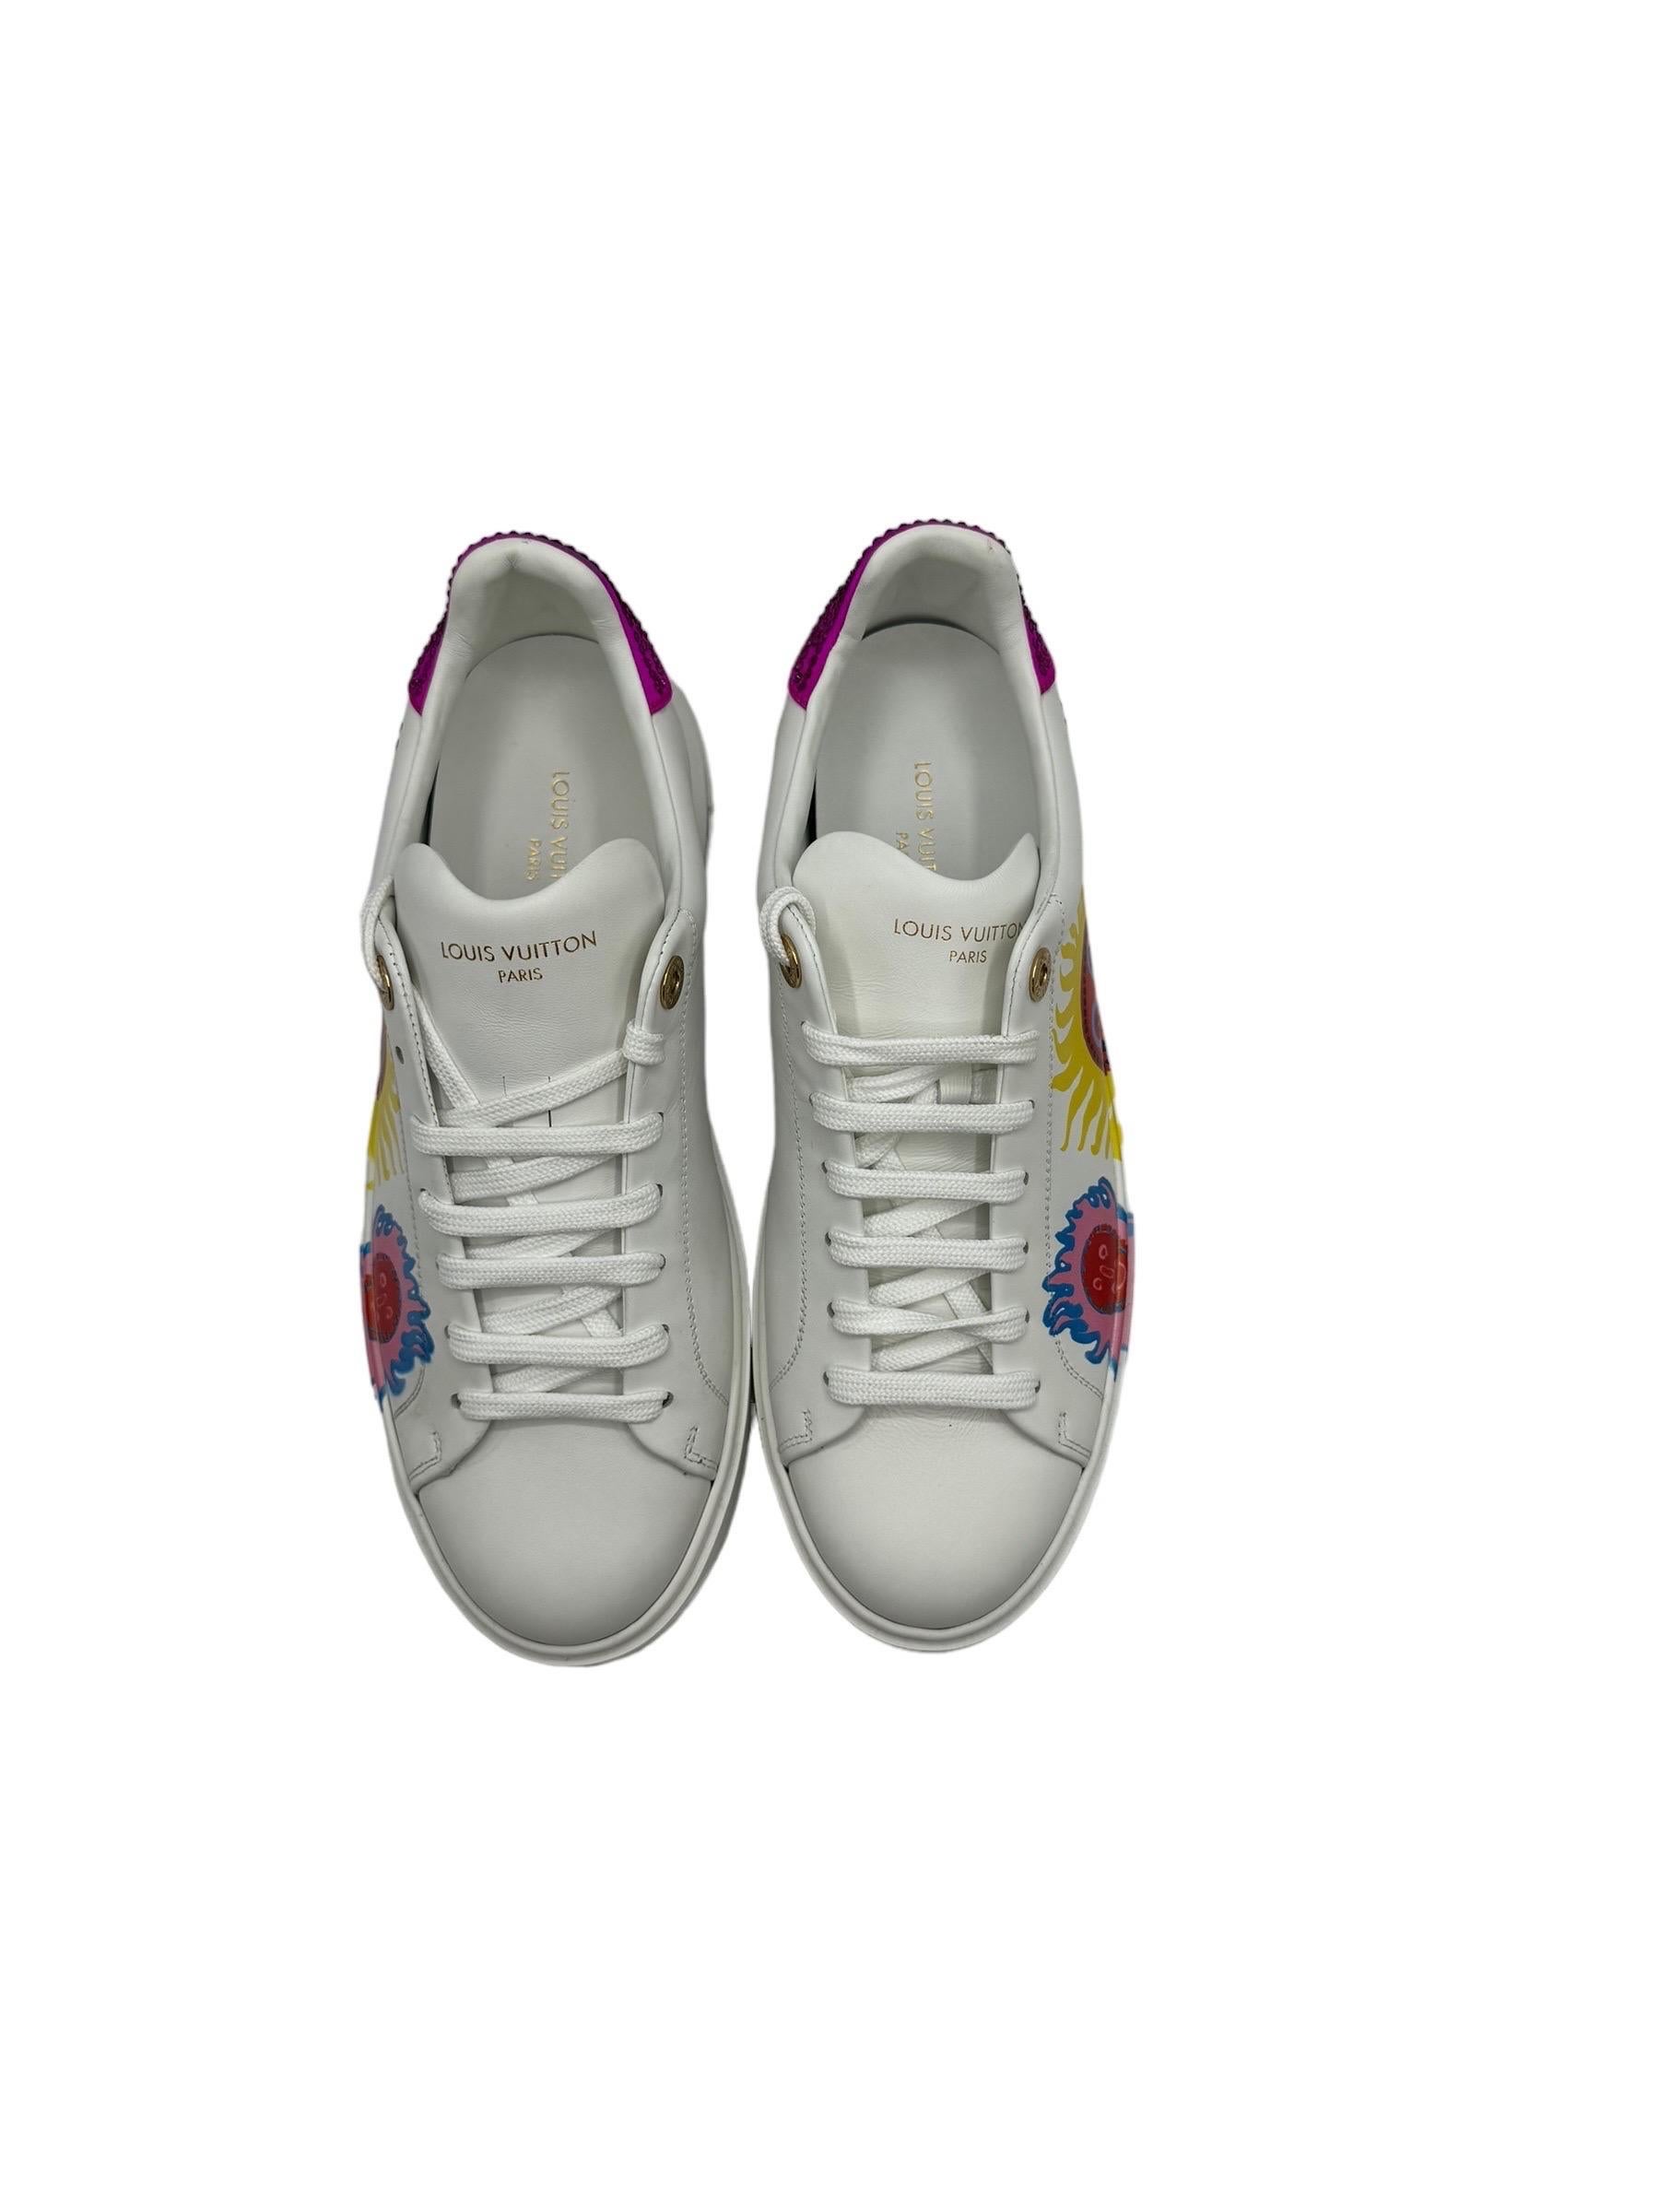 Sneakers Louis Vuitton X Yayoi Kusama Time Out For Sale 5